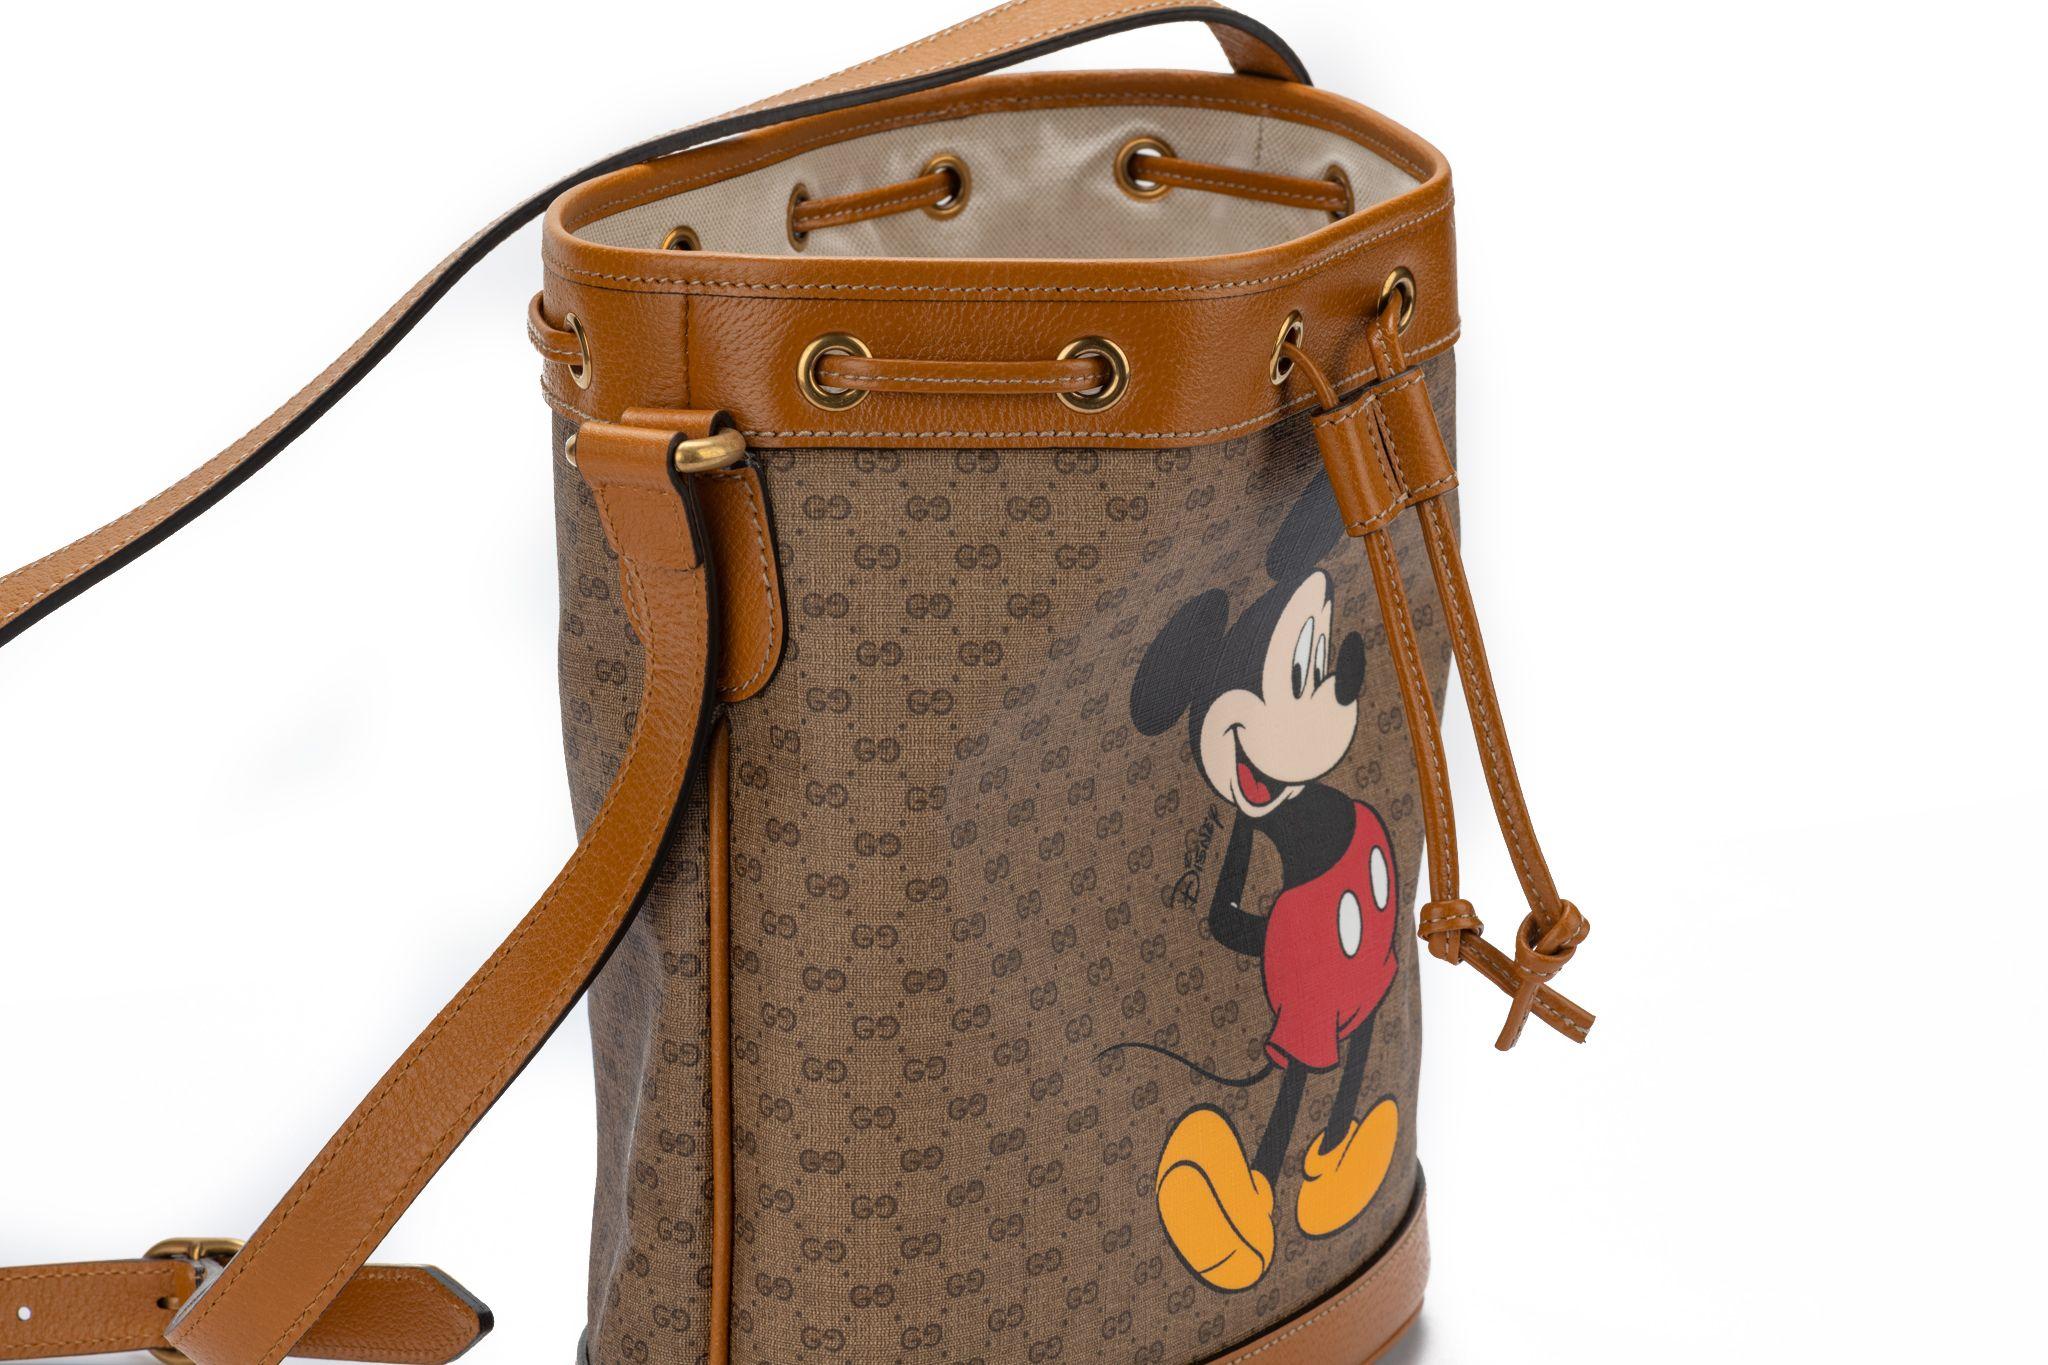 Gucci Disney bucket bag featuring a print of a Mickey Mouse. The bag comes with an adjustable shoulder strap measures 22”. Its new and comes with booklets and original dustcover.